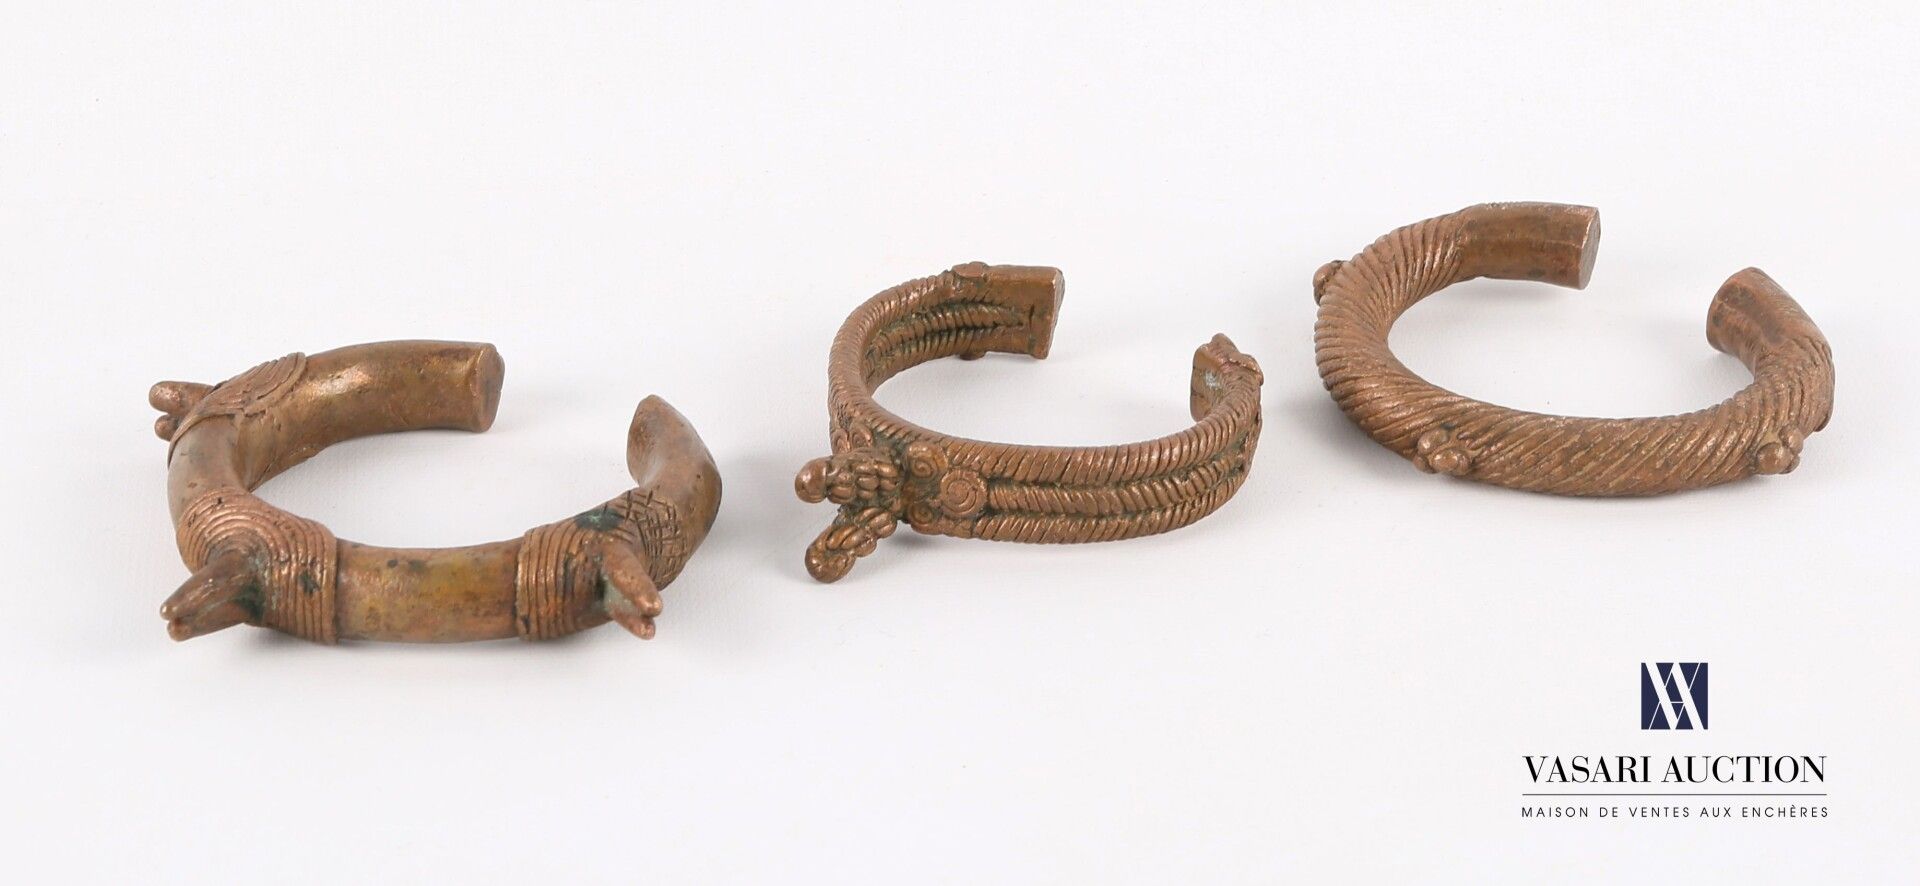 Null AFRICA

Set of three copper bracelets or shackles with twisted stripes, spi&hellip;